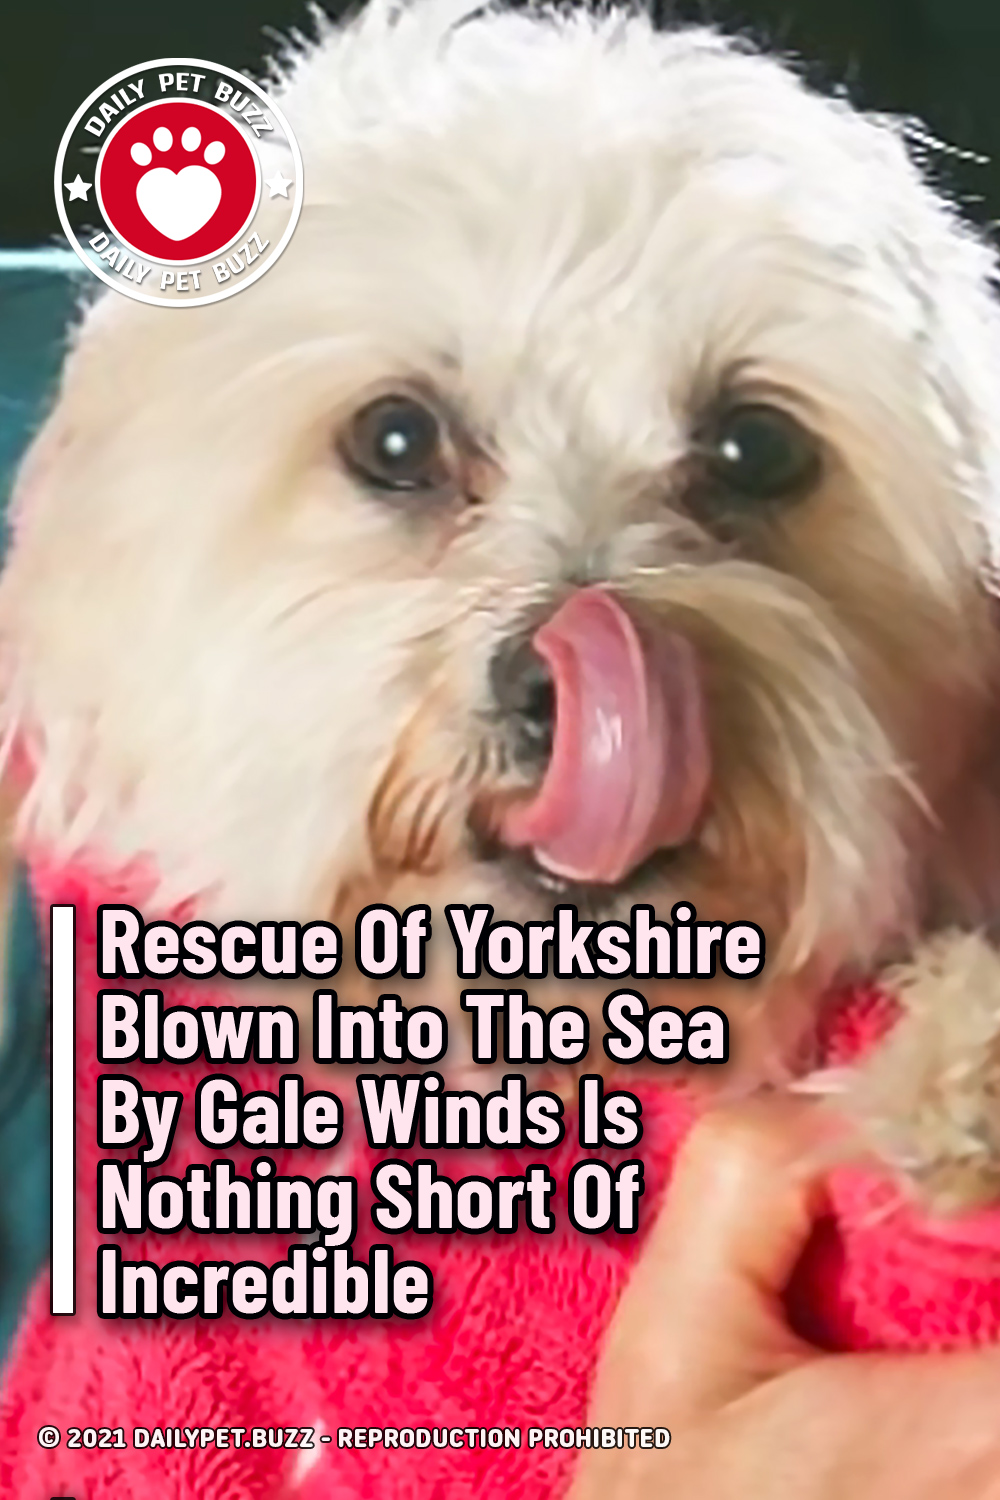 Rescue Of Yorkshire Blown Into The Sea By Gale Winds Is Nothing Short Of Incredible